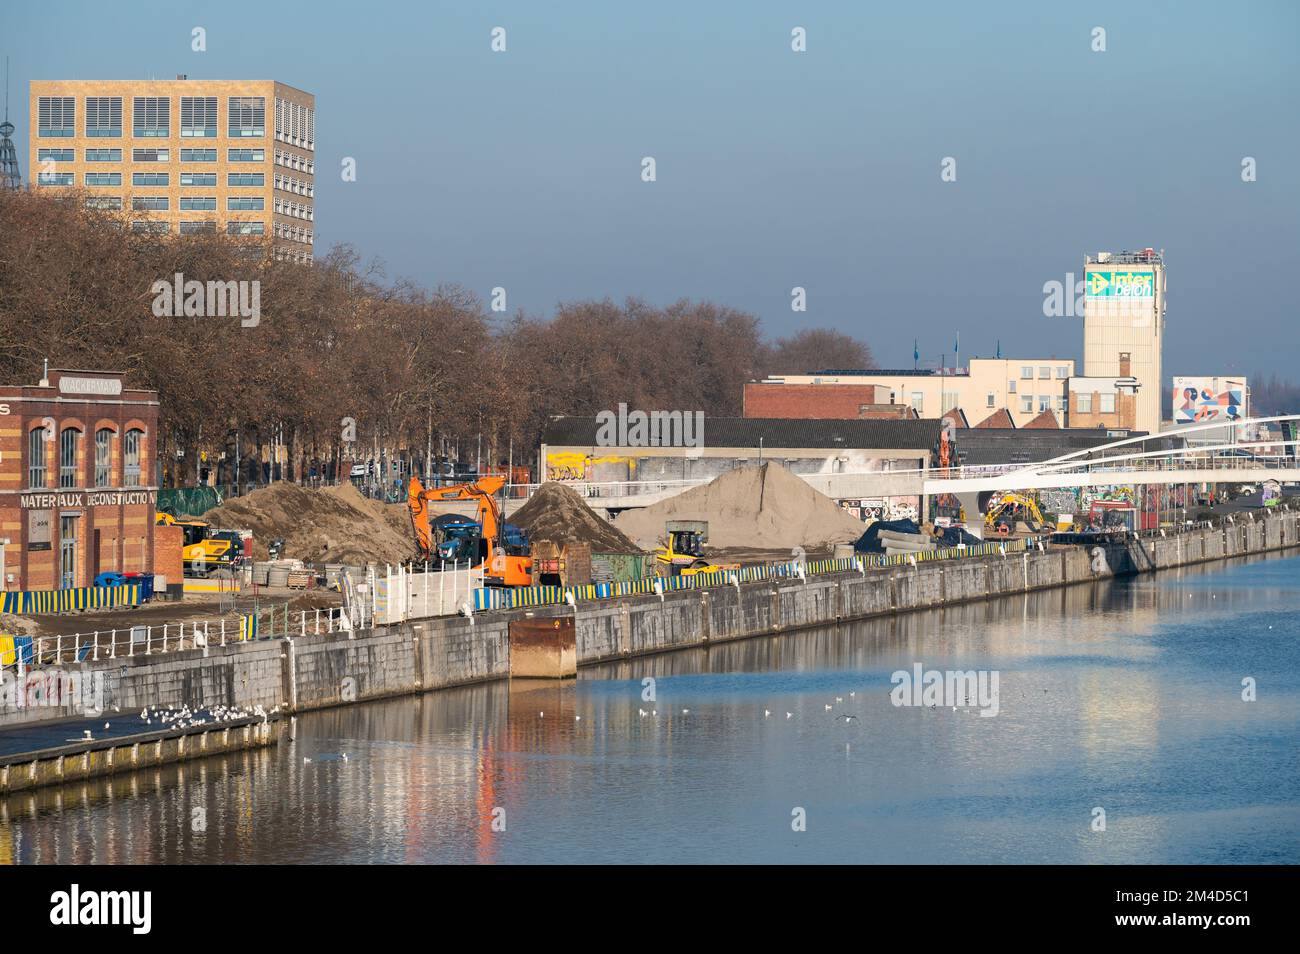 Molenbeek, Brussels Capital Region, Belgium - 12 17 2022 - Industrial activity in the construction business at the banks of the canal Stock Photo